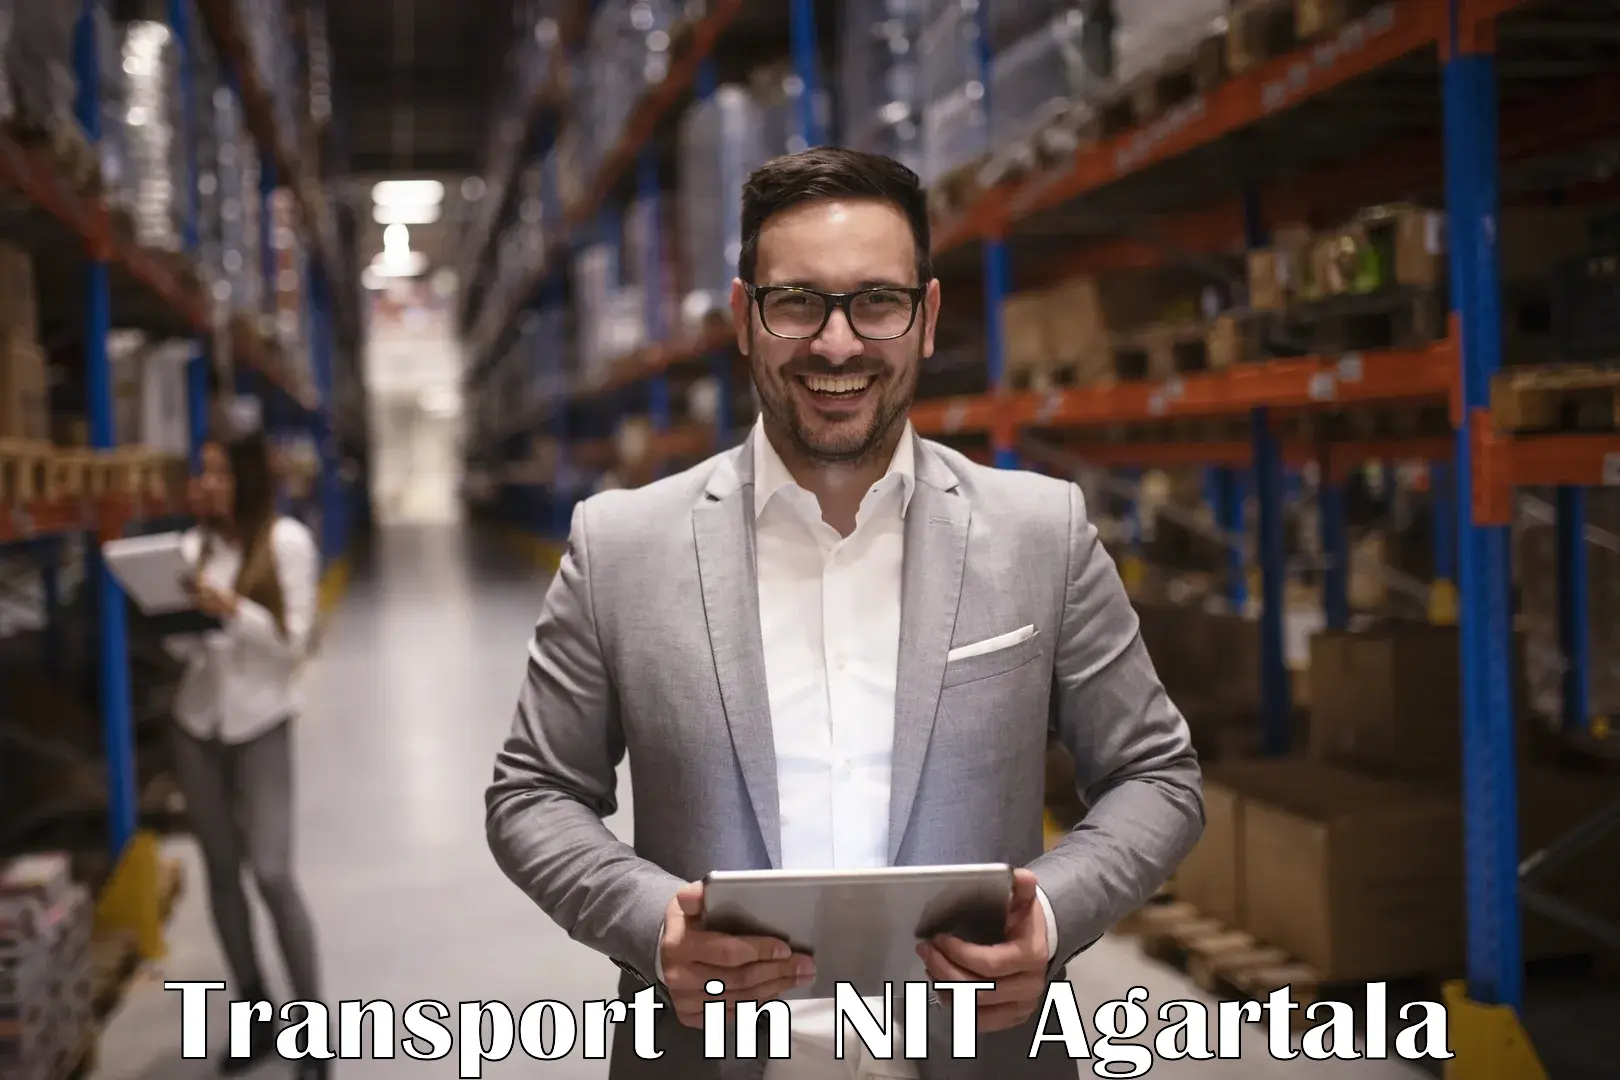 Express transport services in NIT Agartala